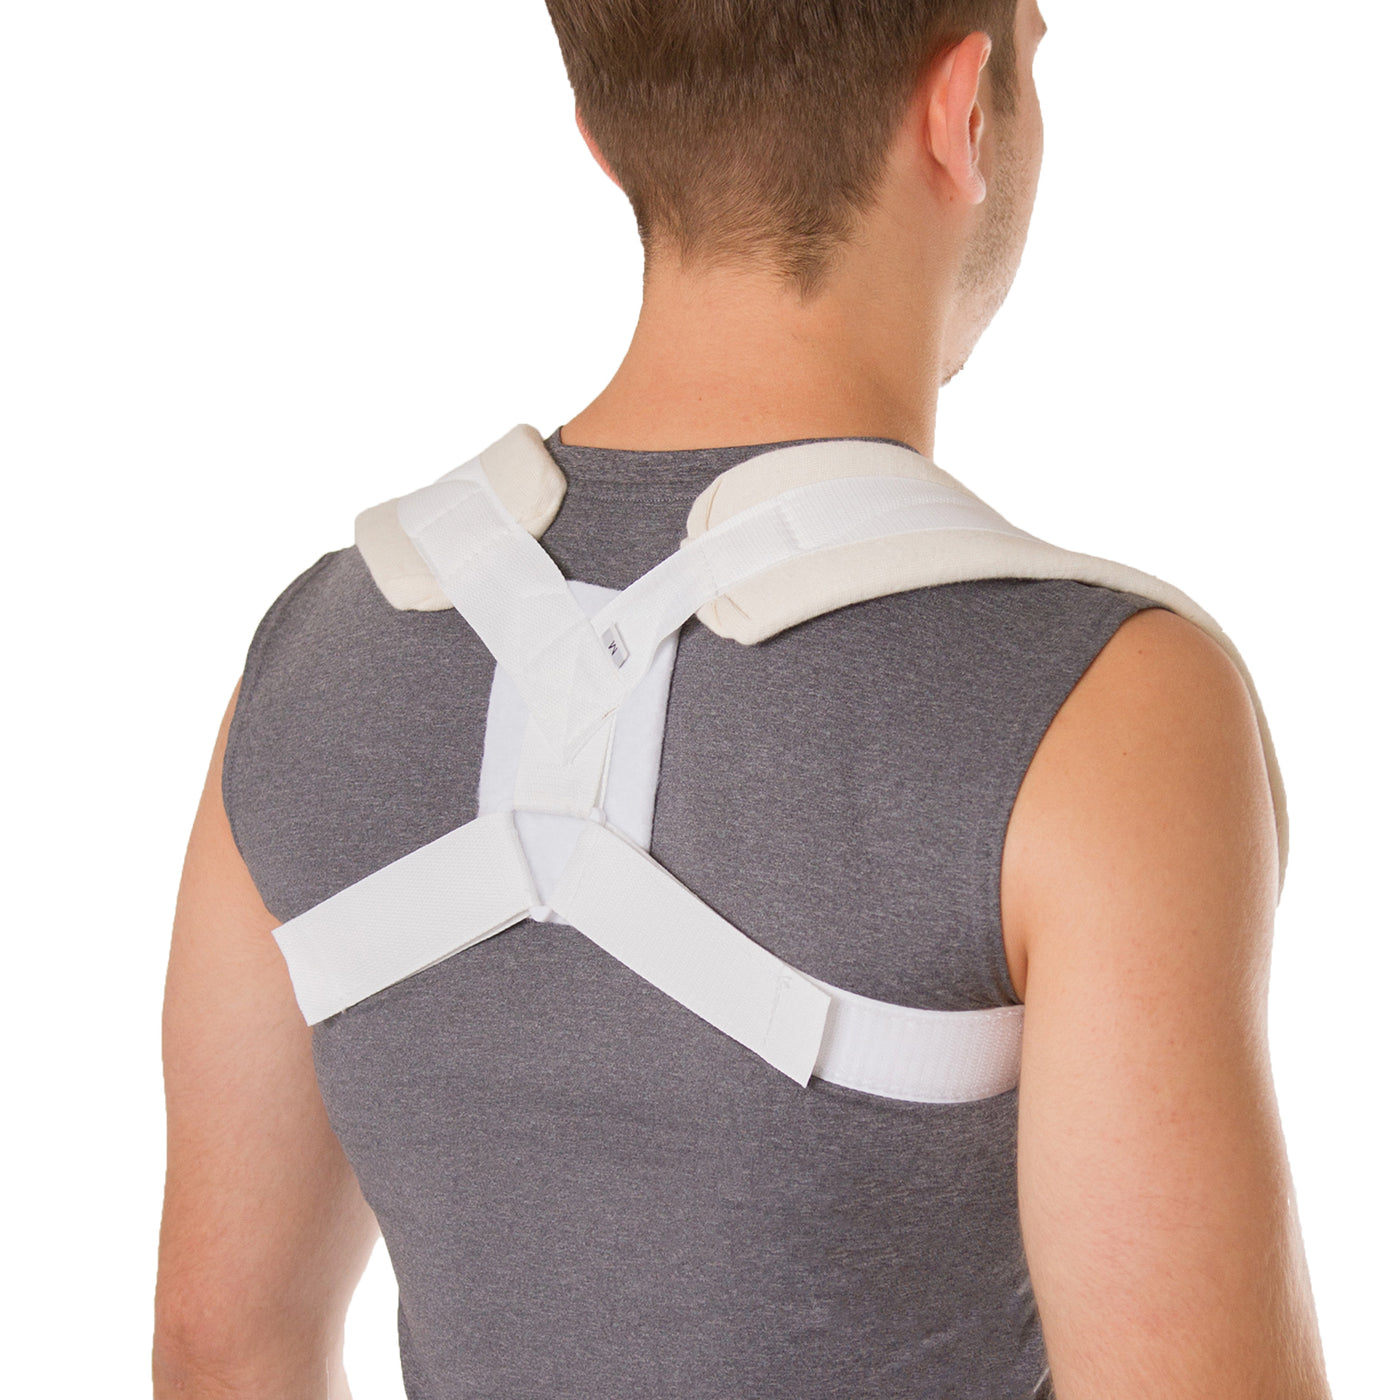 Figure 8 clavicle brace and posture support strap